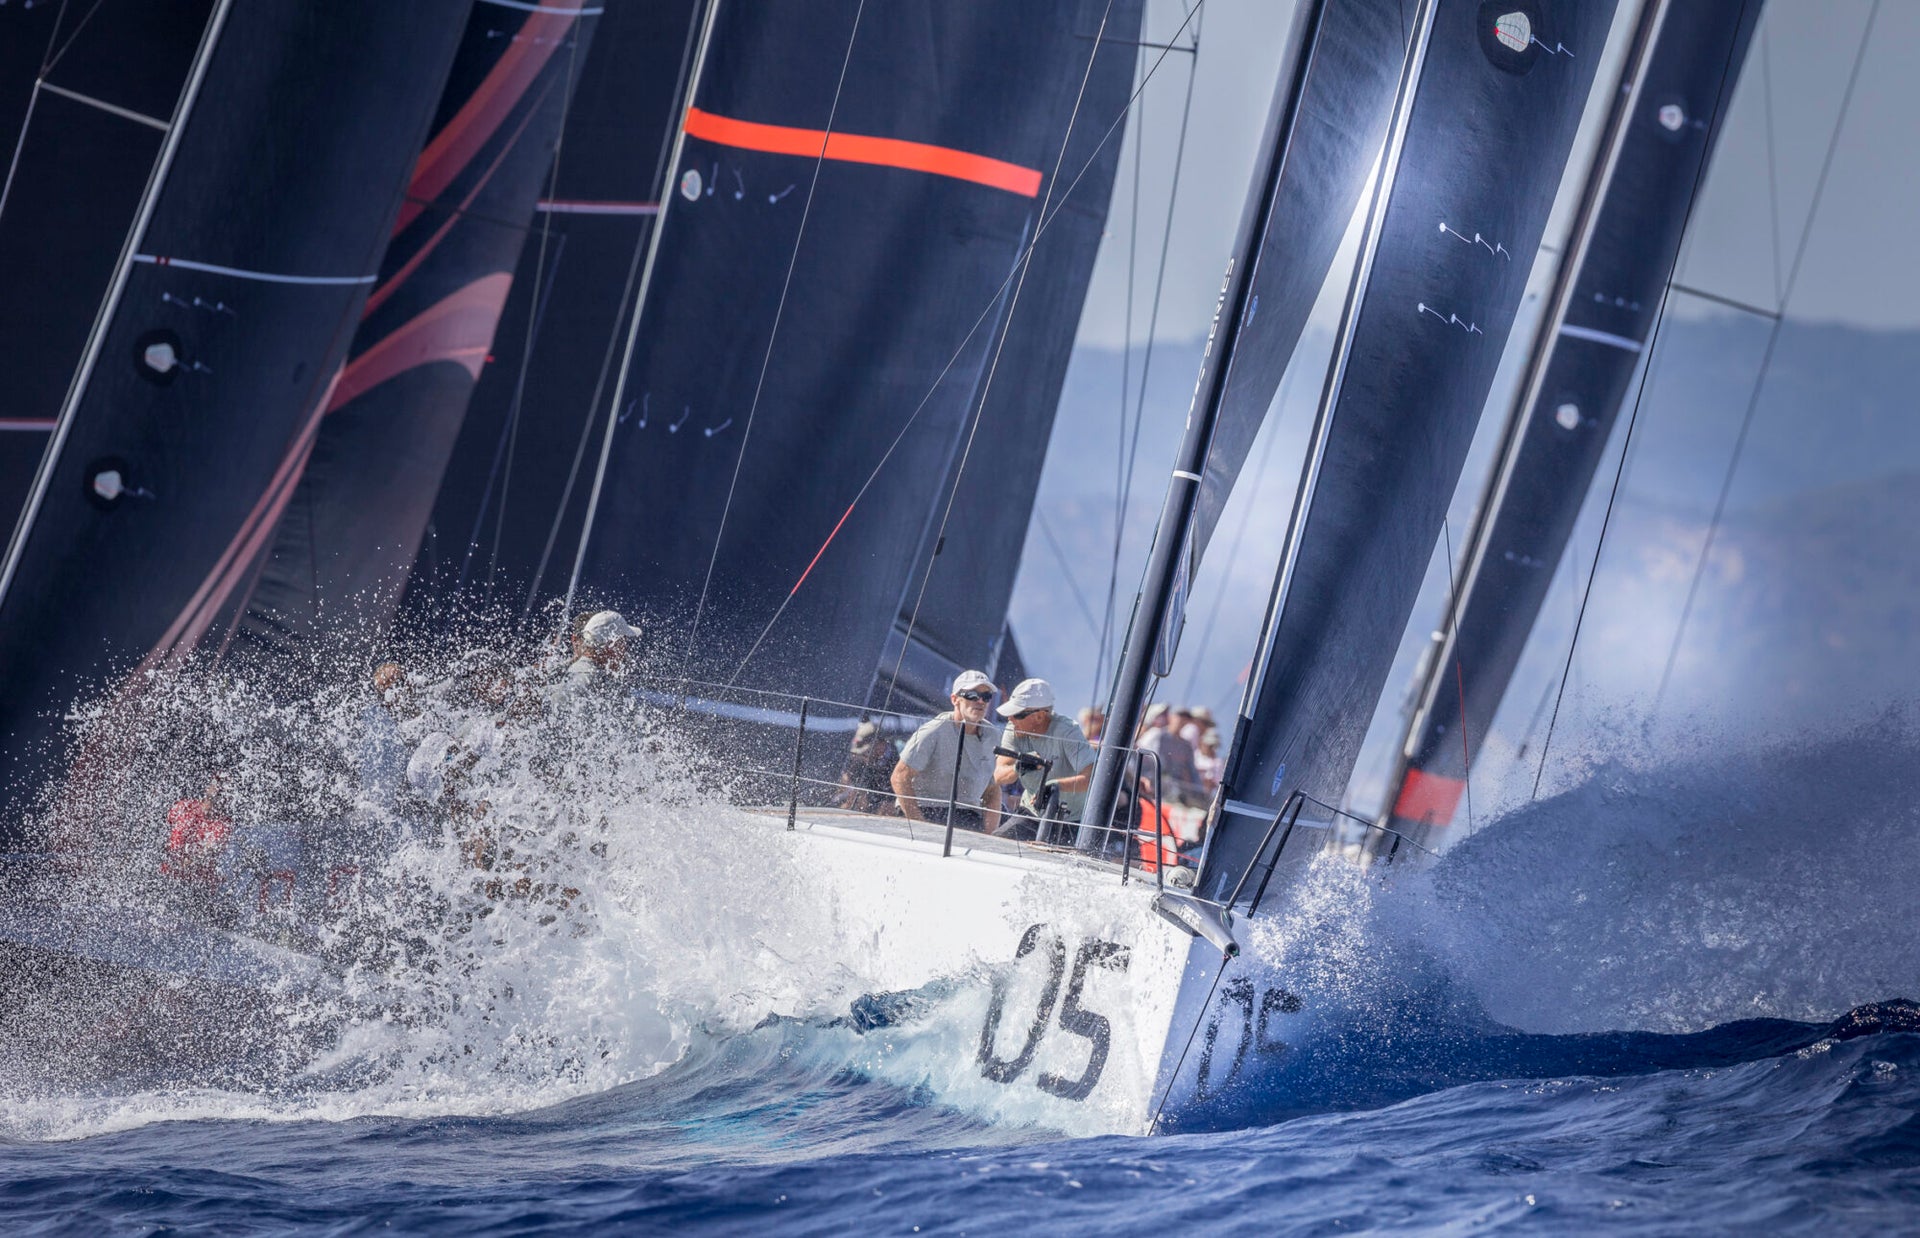 THE 52 SUPER SERIES KEEPS NORTH SAILS IN CONSTANT DEVELOPMENT